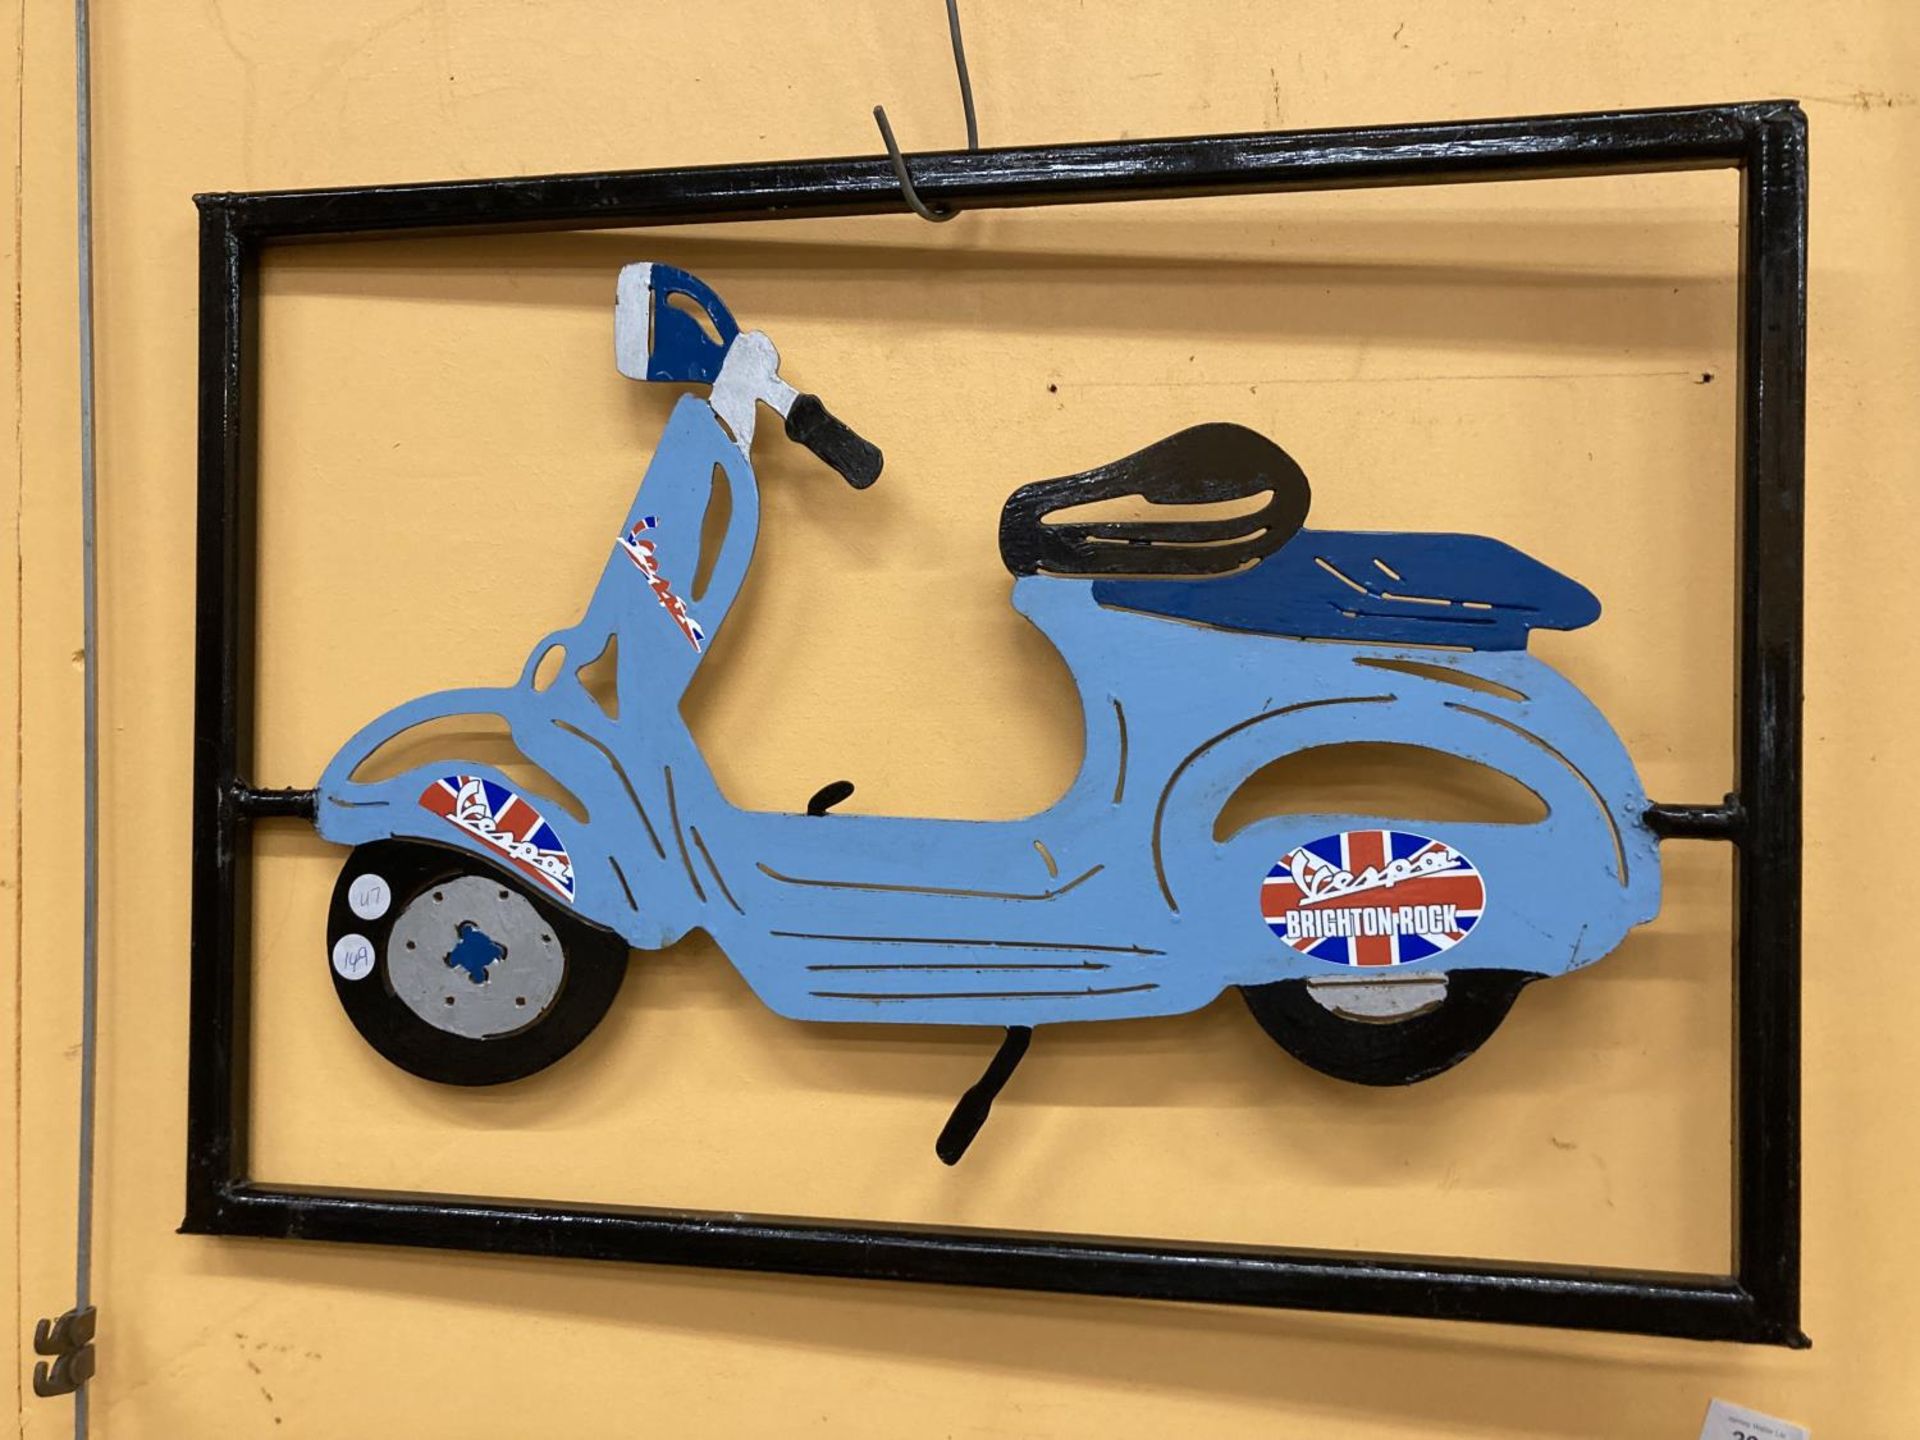 A METAL VESPA SCOOTER IN A METAL FRAME 44CM X 63CM